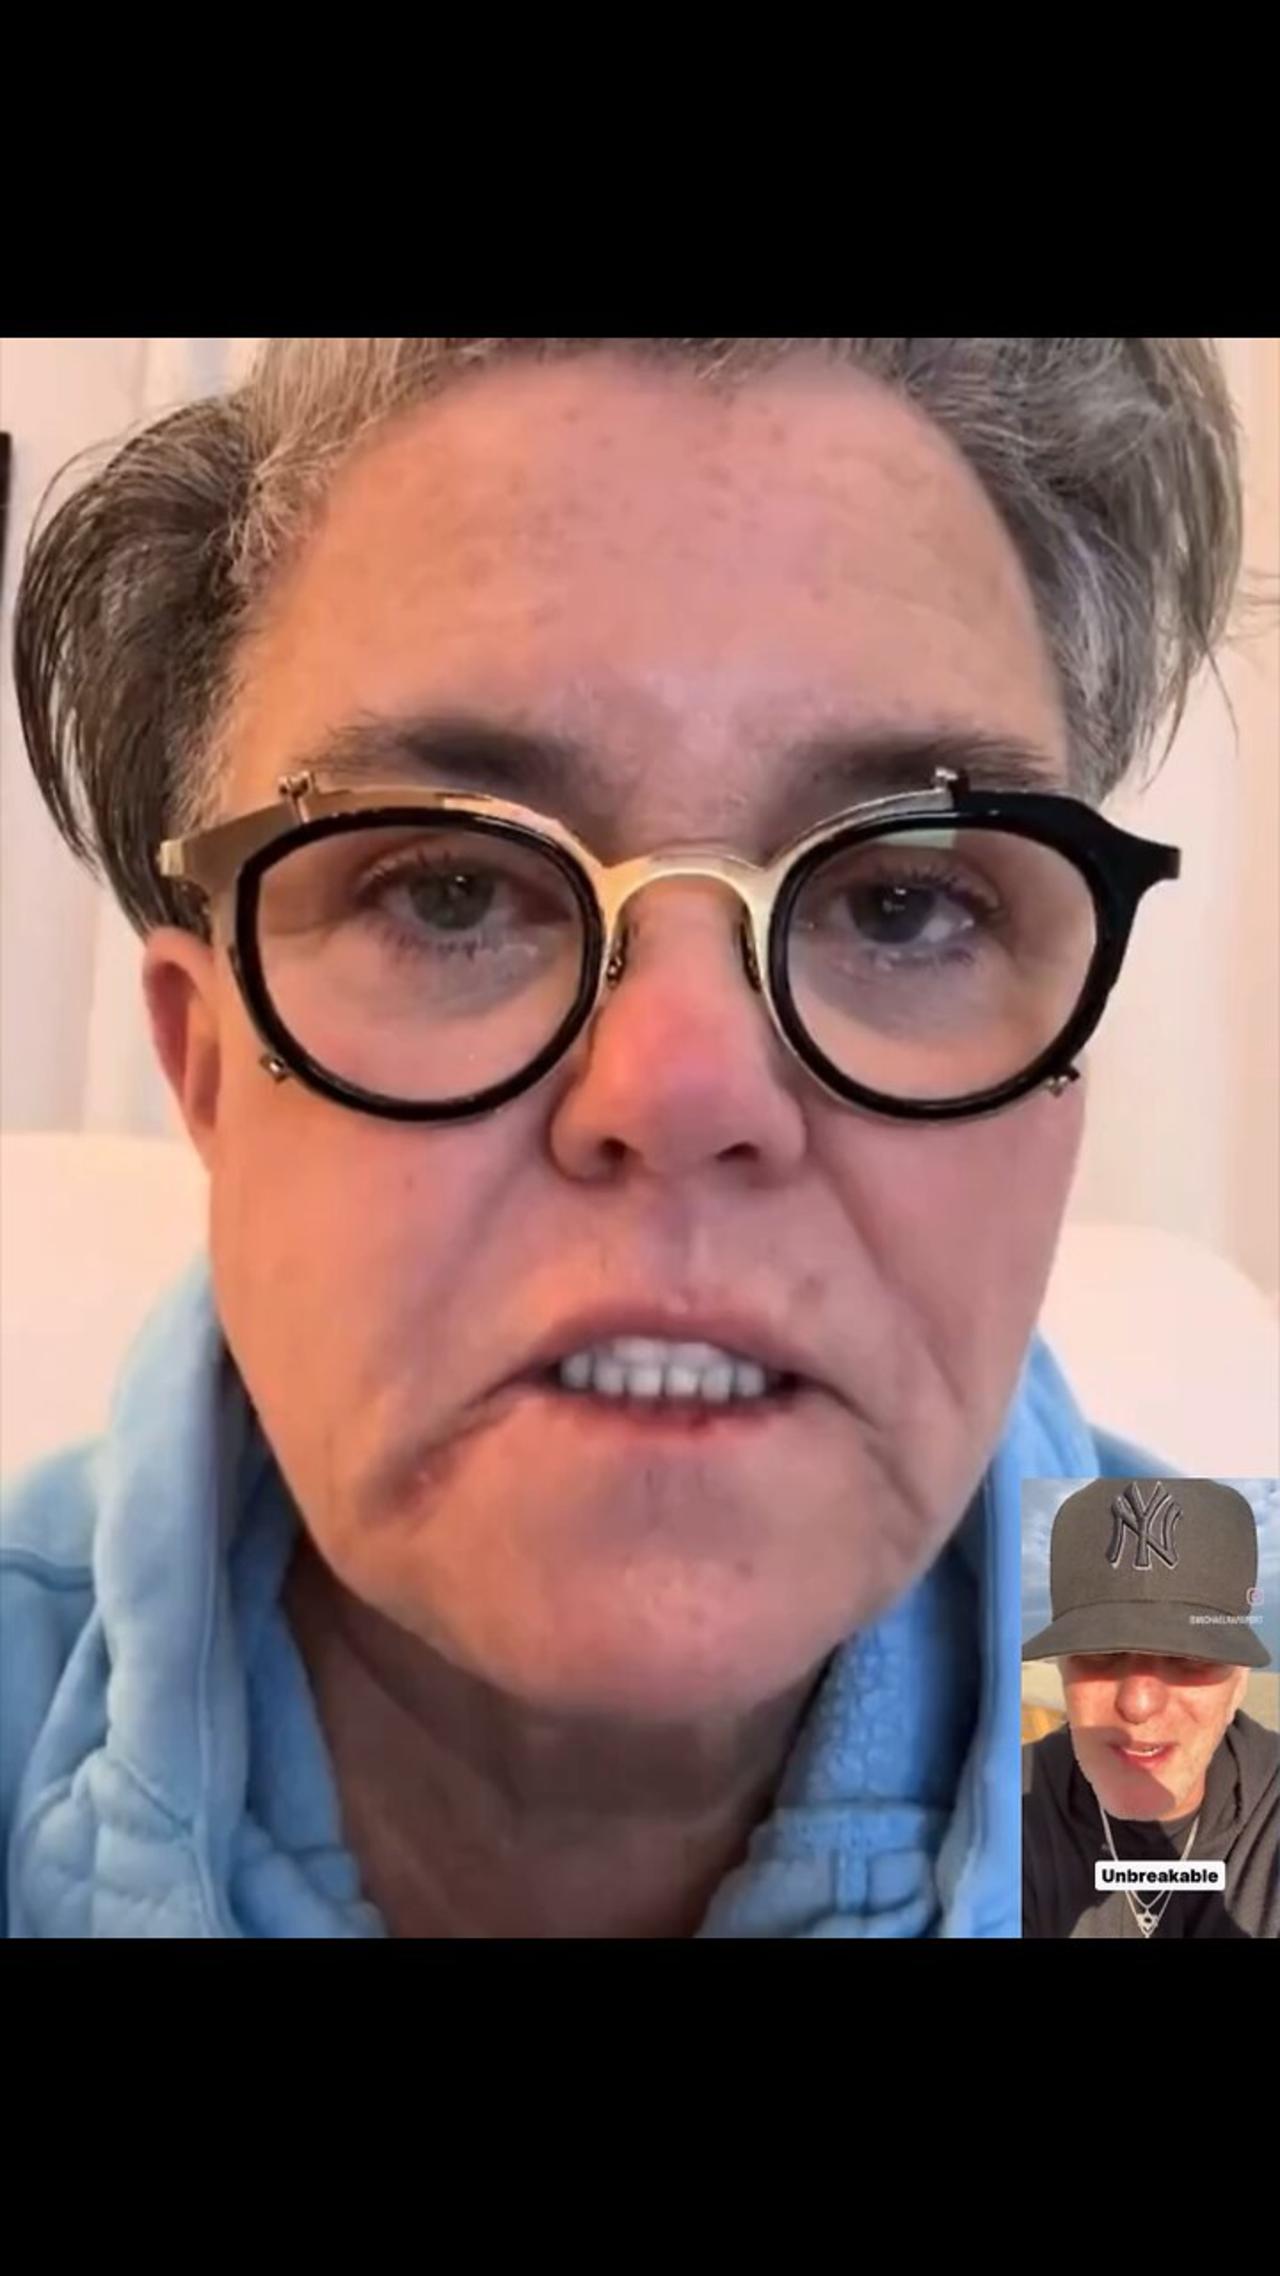 If Rosie O’Donnell and Michael Rapaport facetimed